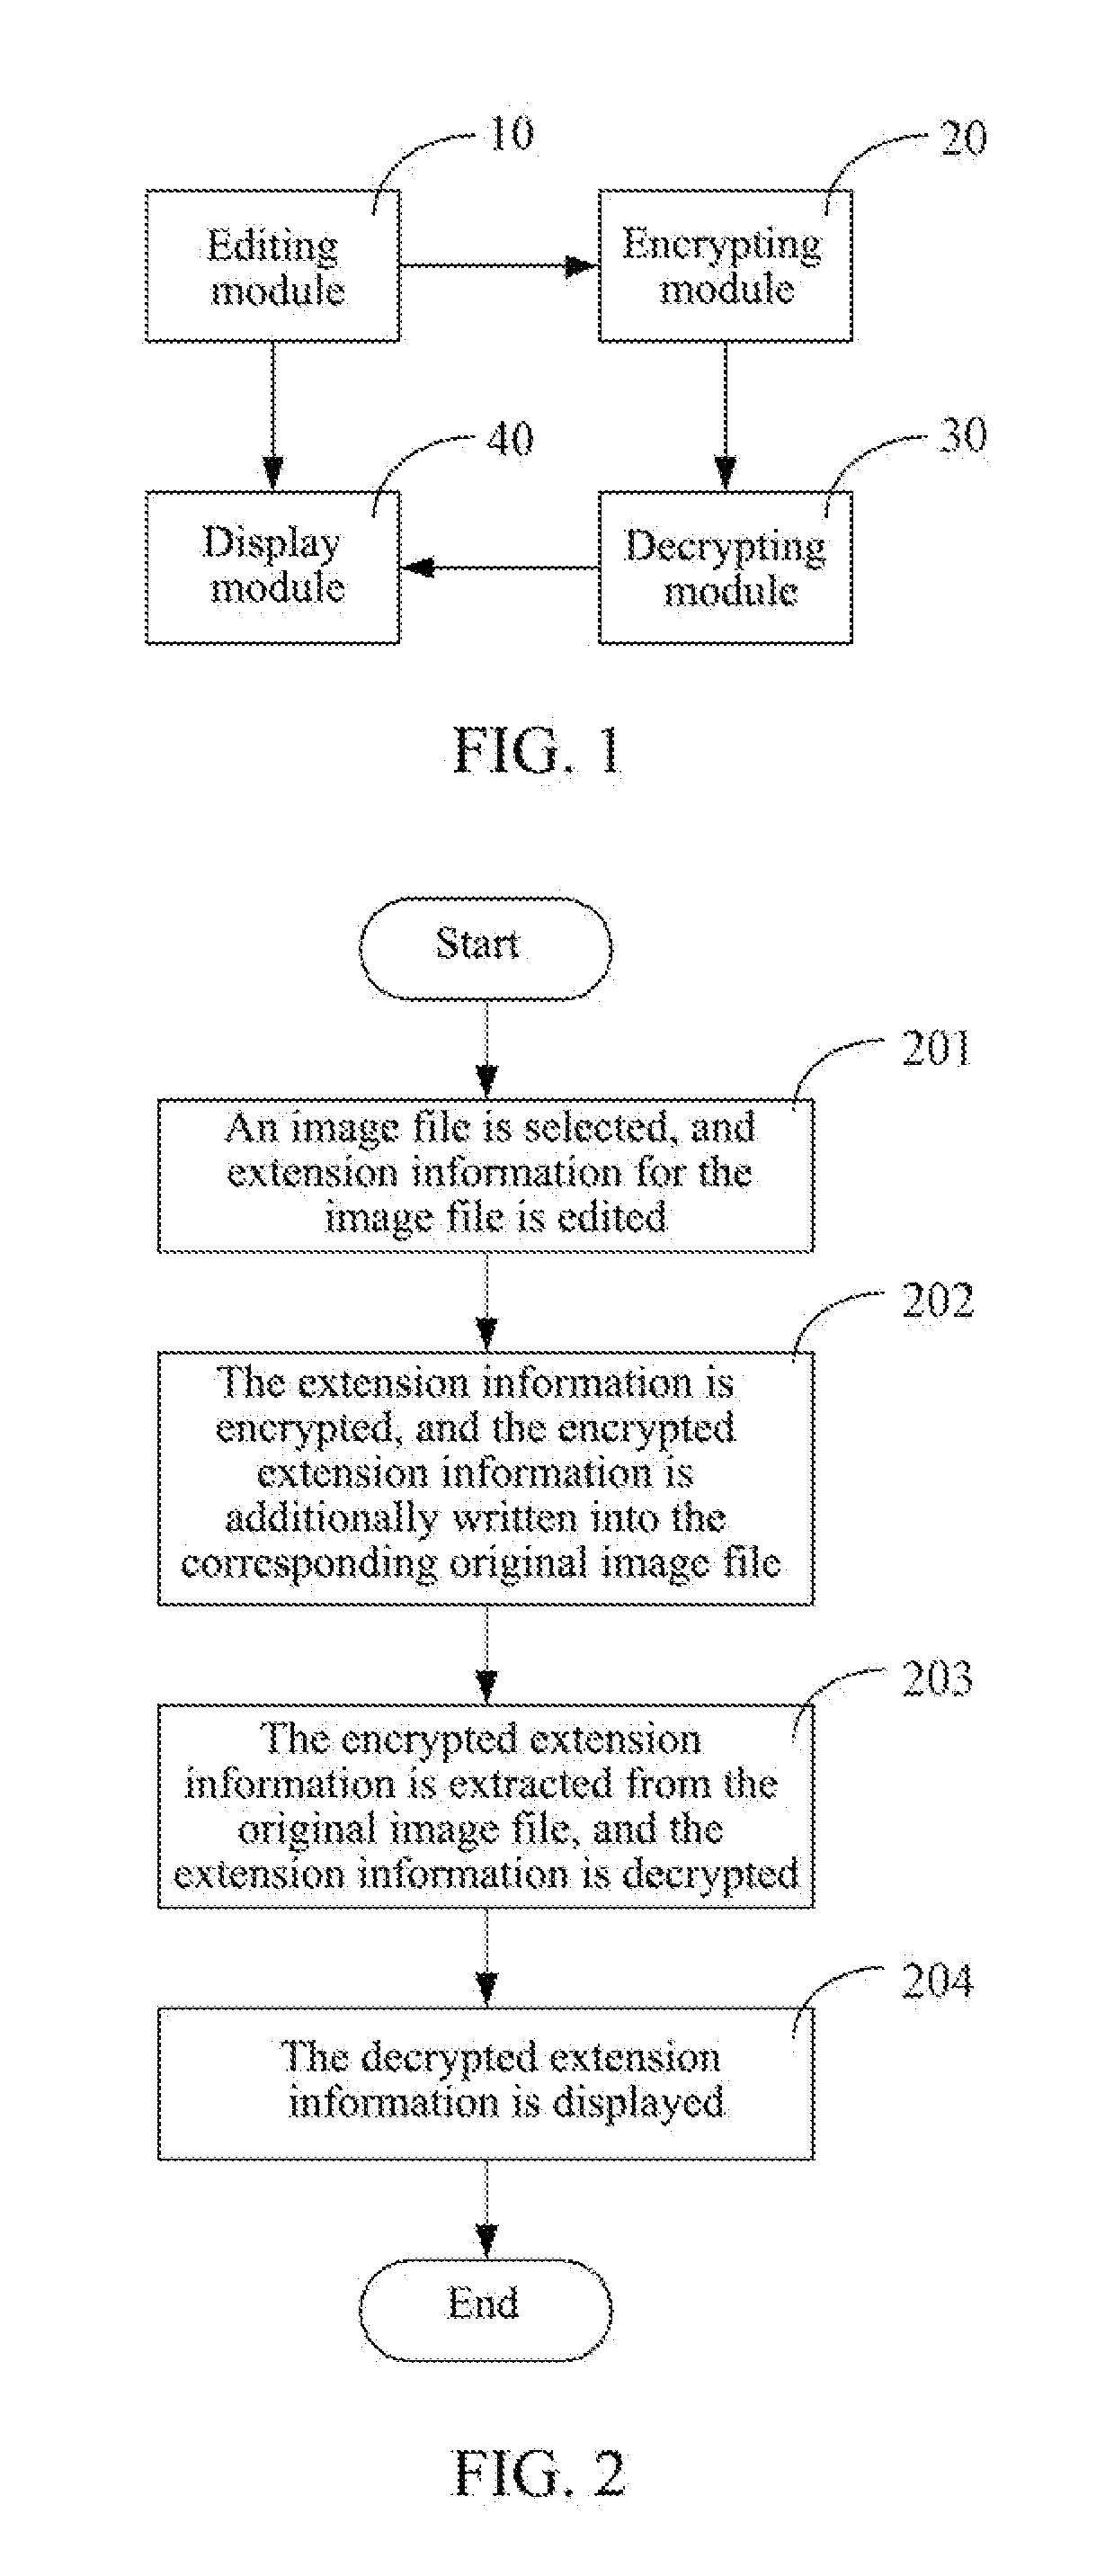 Apparatus and Method for Processing Extension Information in Image Files